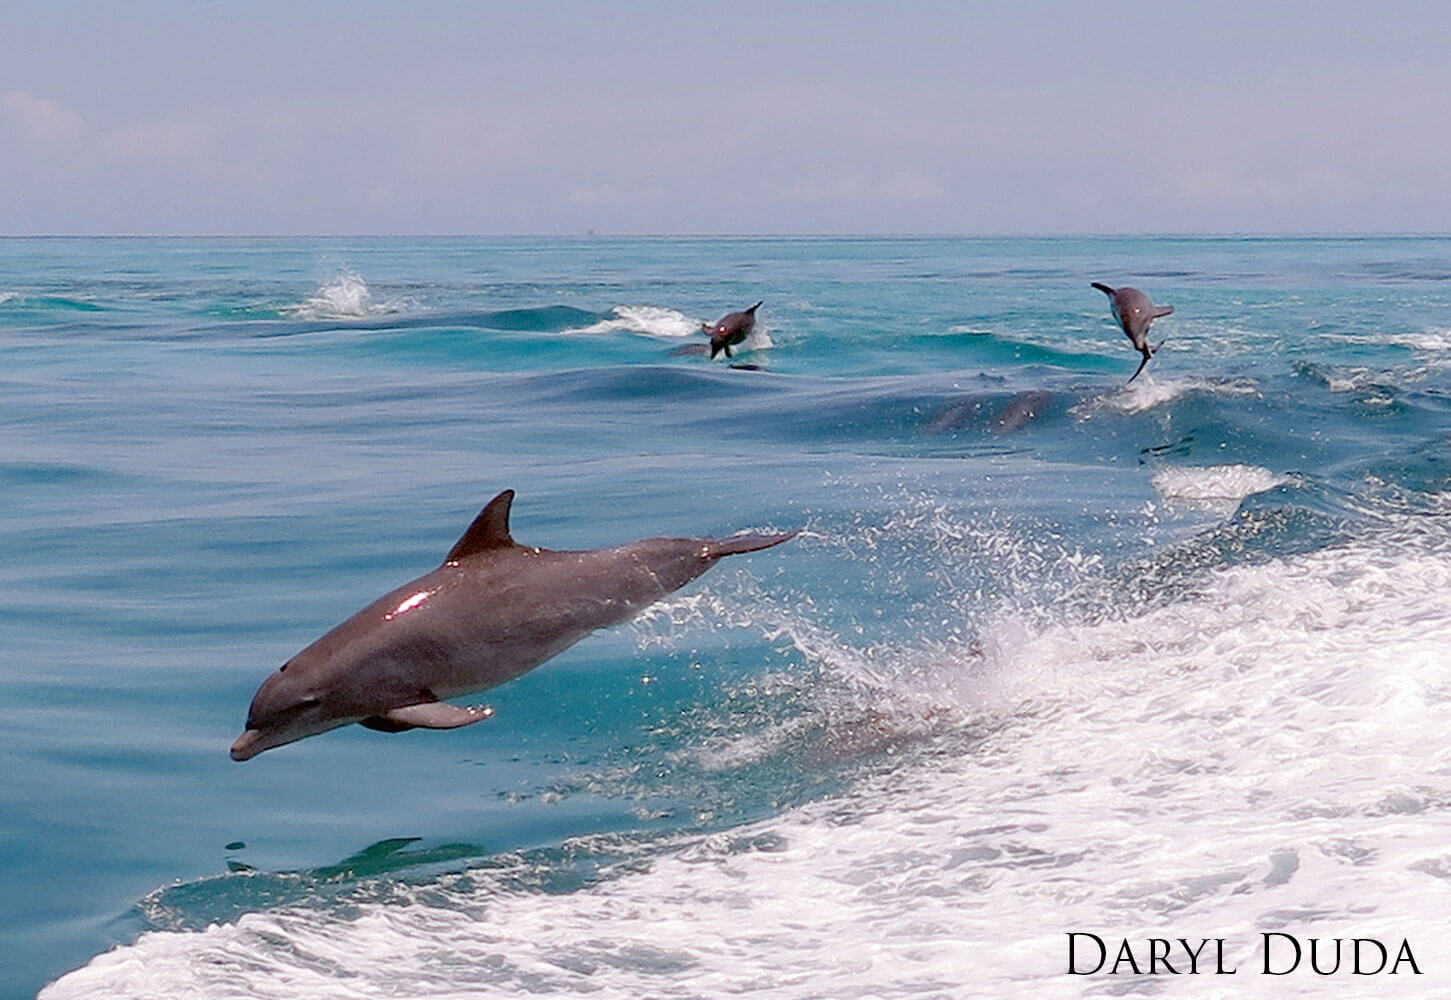 Pod of dolphins jumping in the waves.